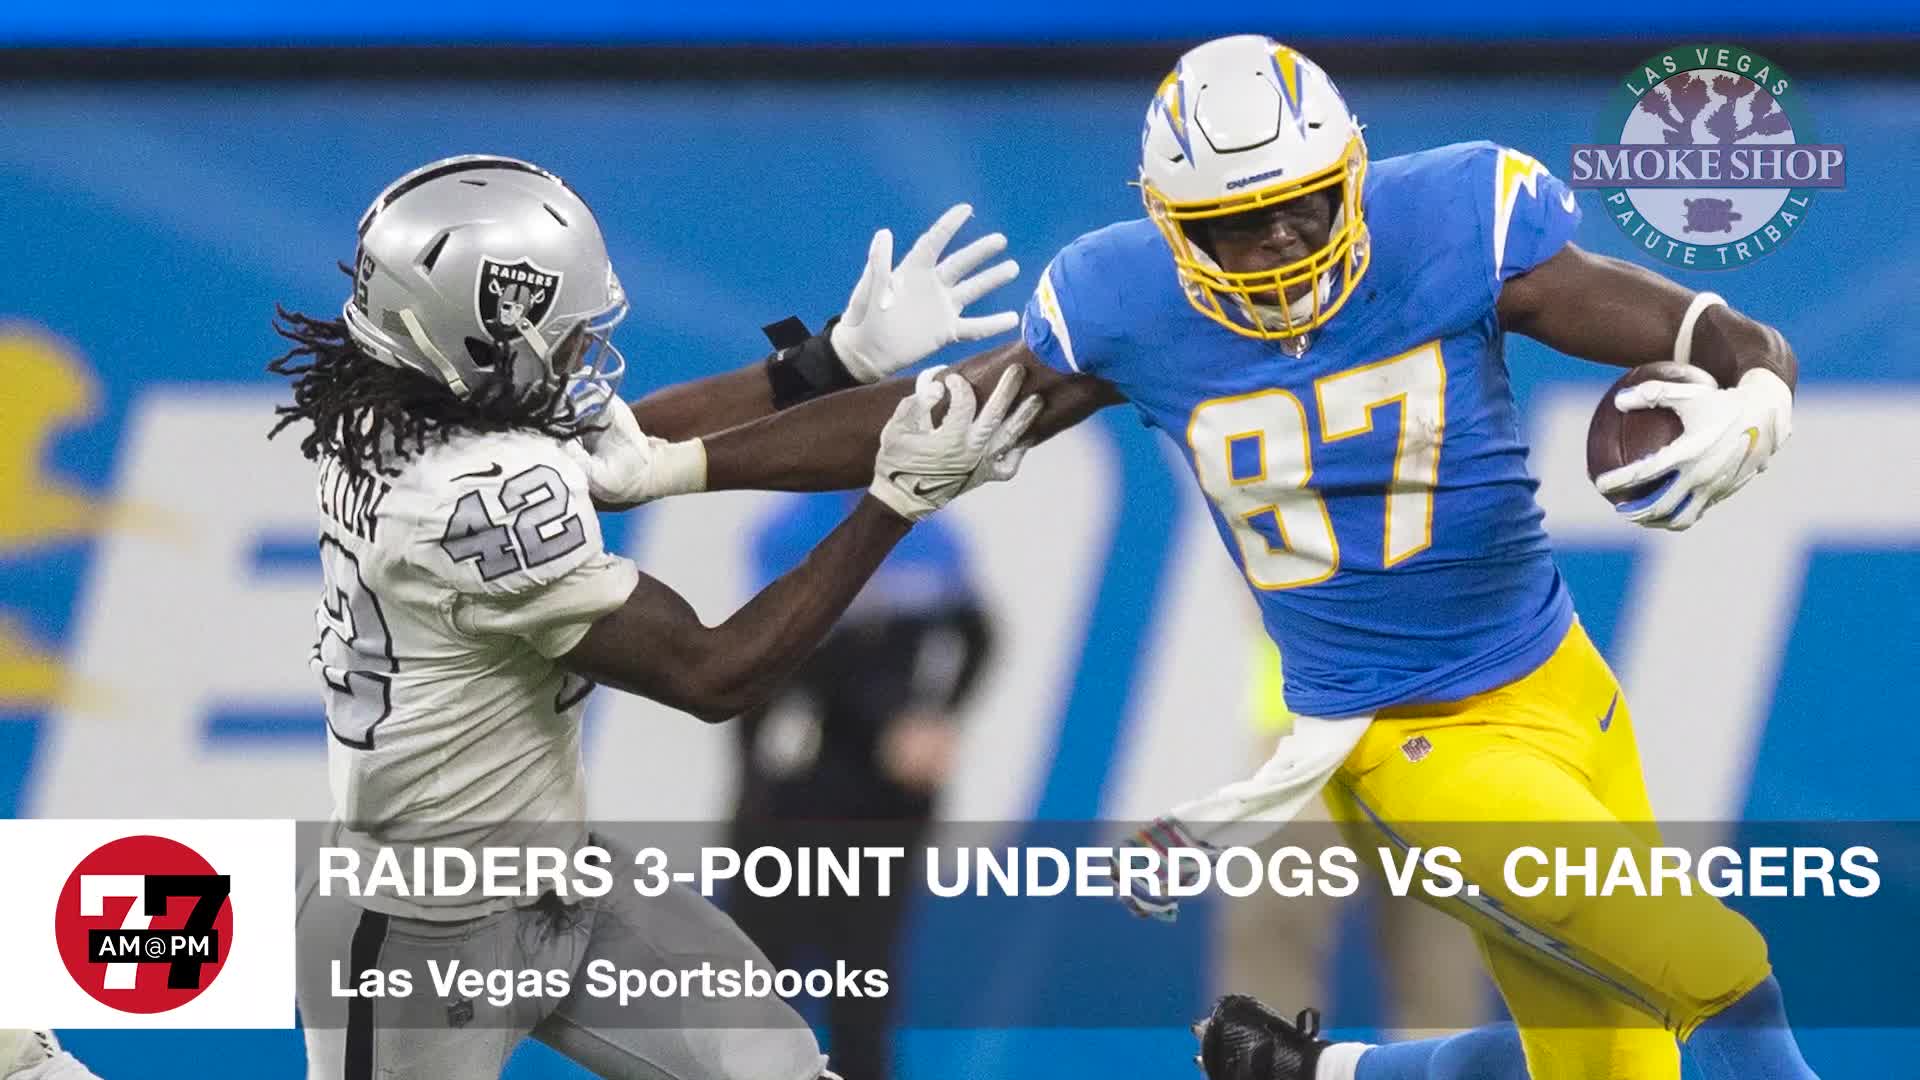 7@7PM Raiders 3-Point Underdogs vs. Chargers